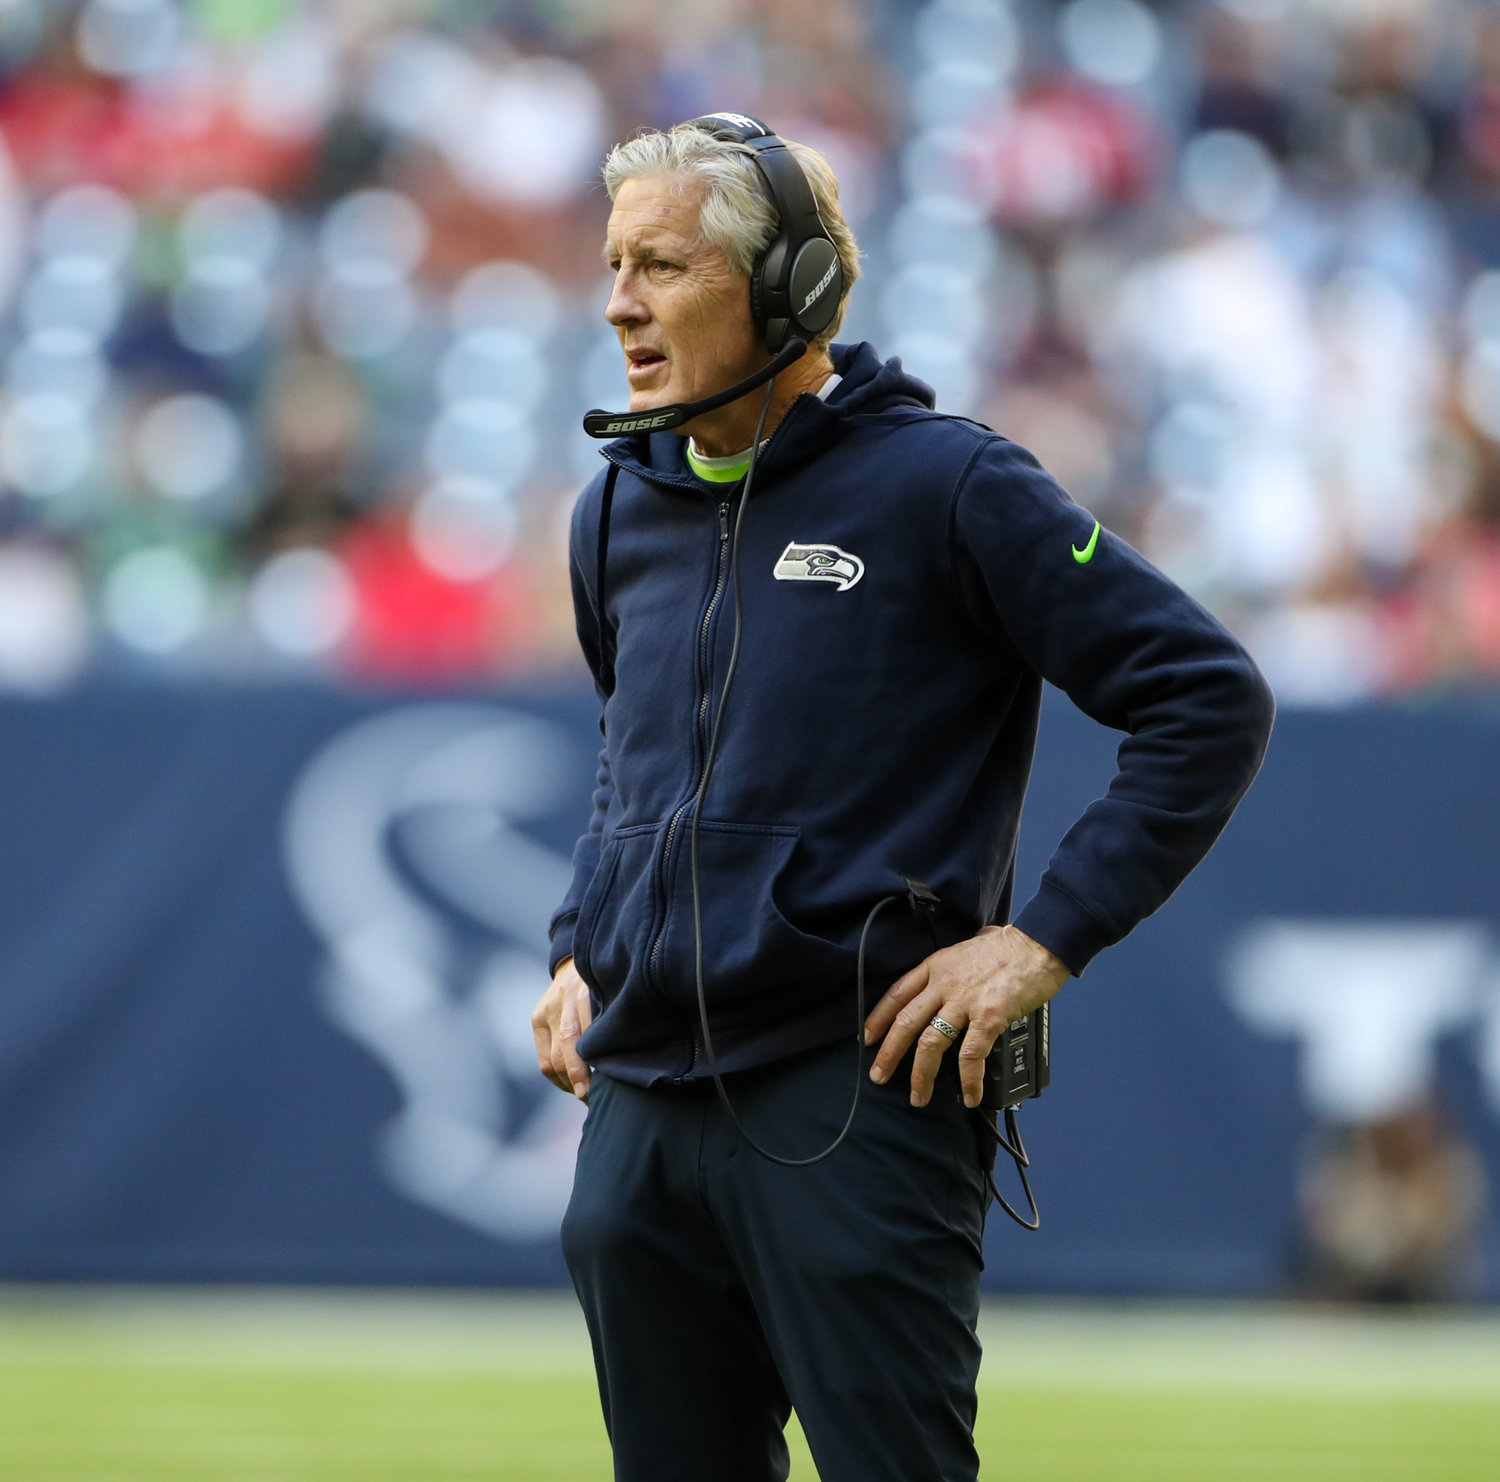 Seattle Seahawks head coach Pete Carroll looks on during the second half of an NFL game between the Seahawks and the Texans on December 12, 2021 in Houston, Texas.